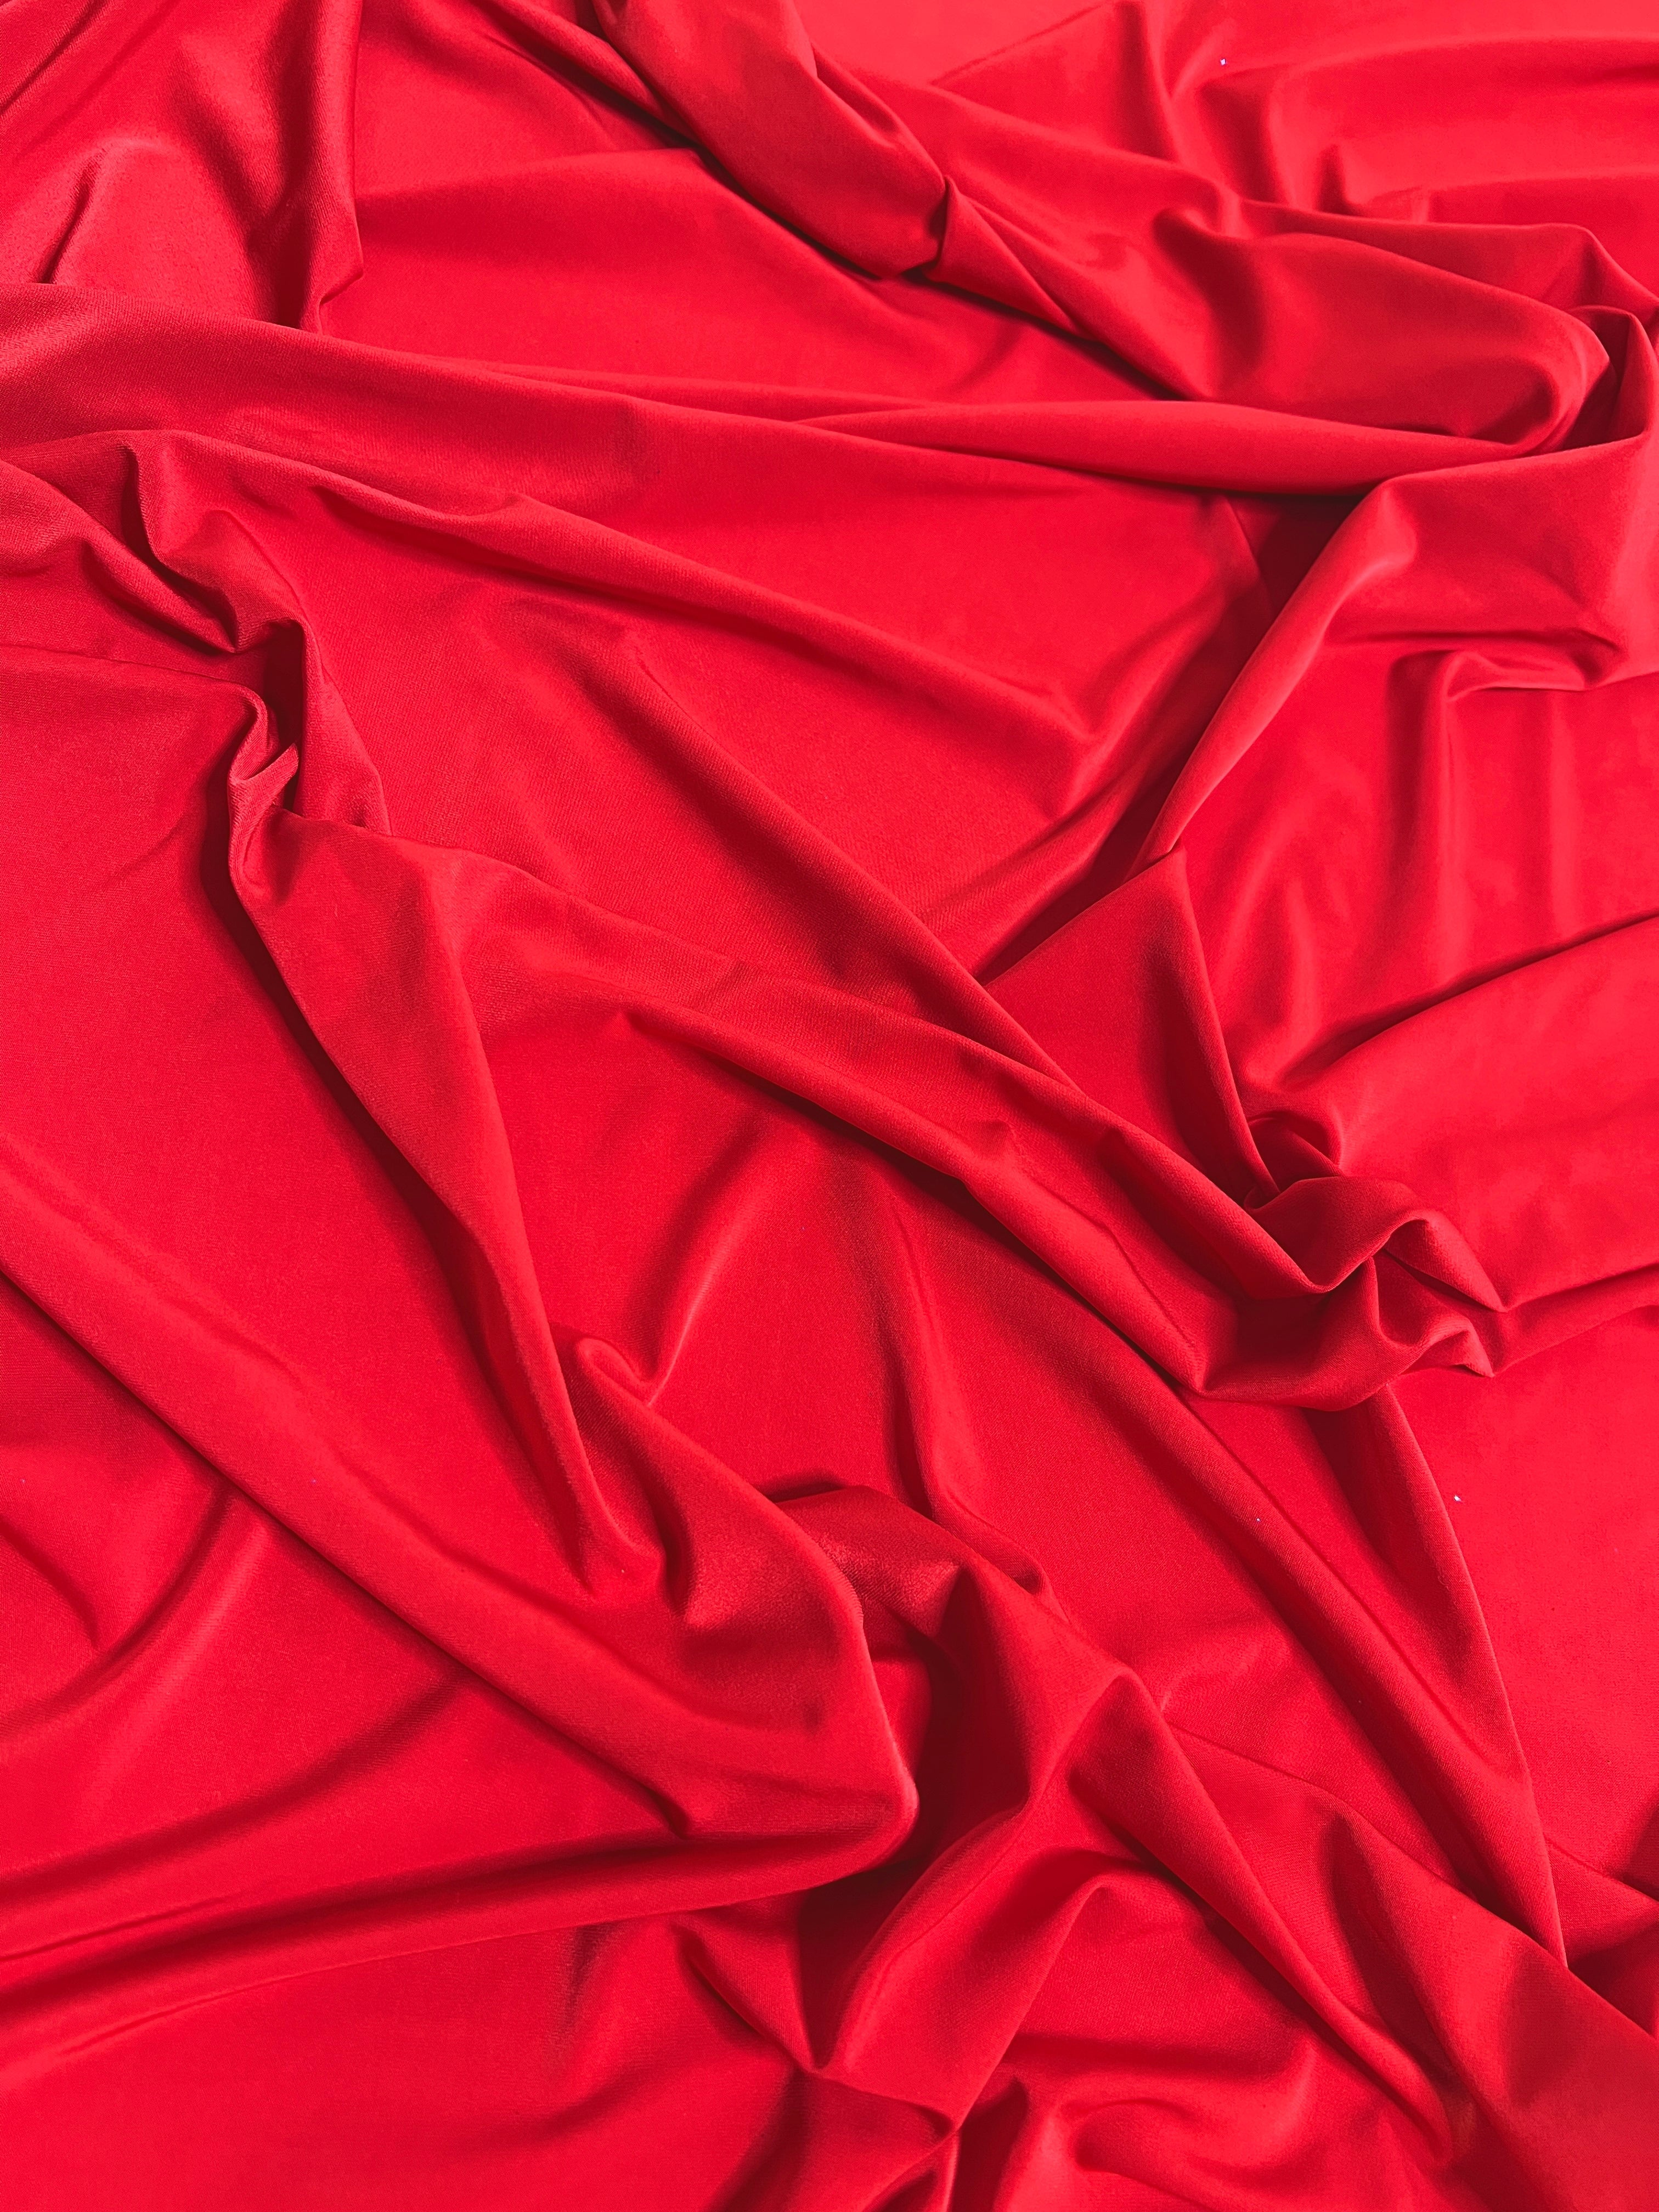 red ity spandex, 4 way stretch ity spandex, dark red ity spandex, shiny red ity spandex, ity spandex for woman in red, spandex for costume, spandex for sweatpants, spandex for gown, spandex on discount, spandex in low price, ity fabric on sale